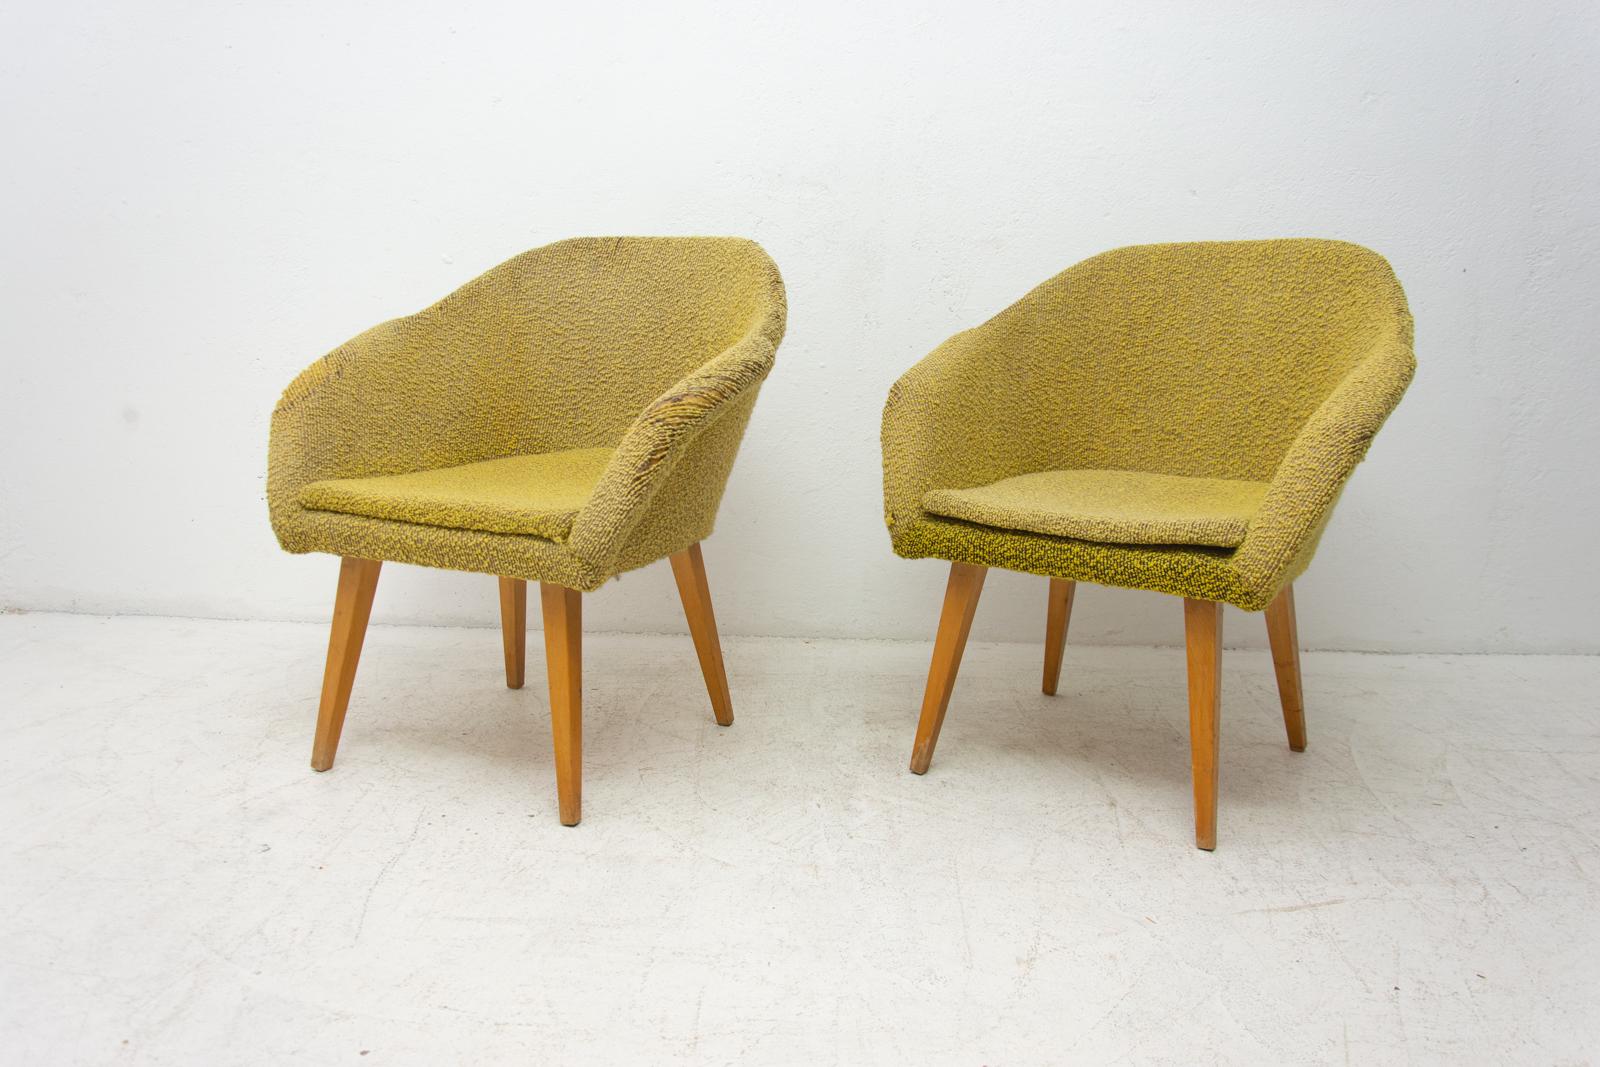 Pair of Midcentury Shell Fiberglass Lounge Chairs, Czechoslovakia, 1960s In Good Condition For Sale In Prague 8, CZ